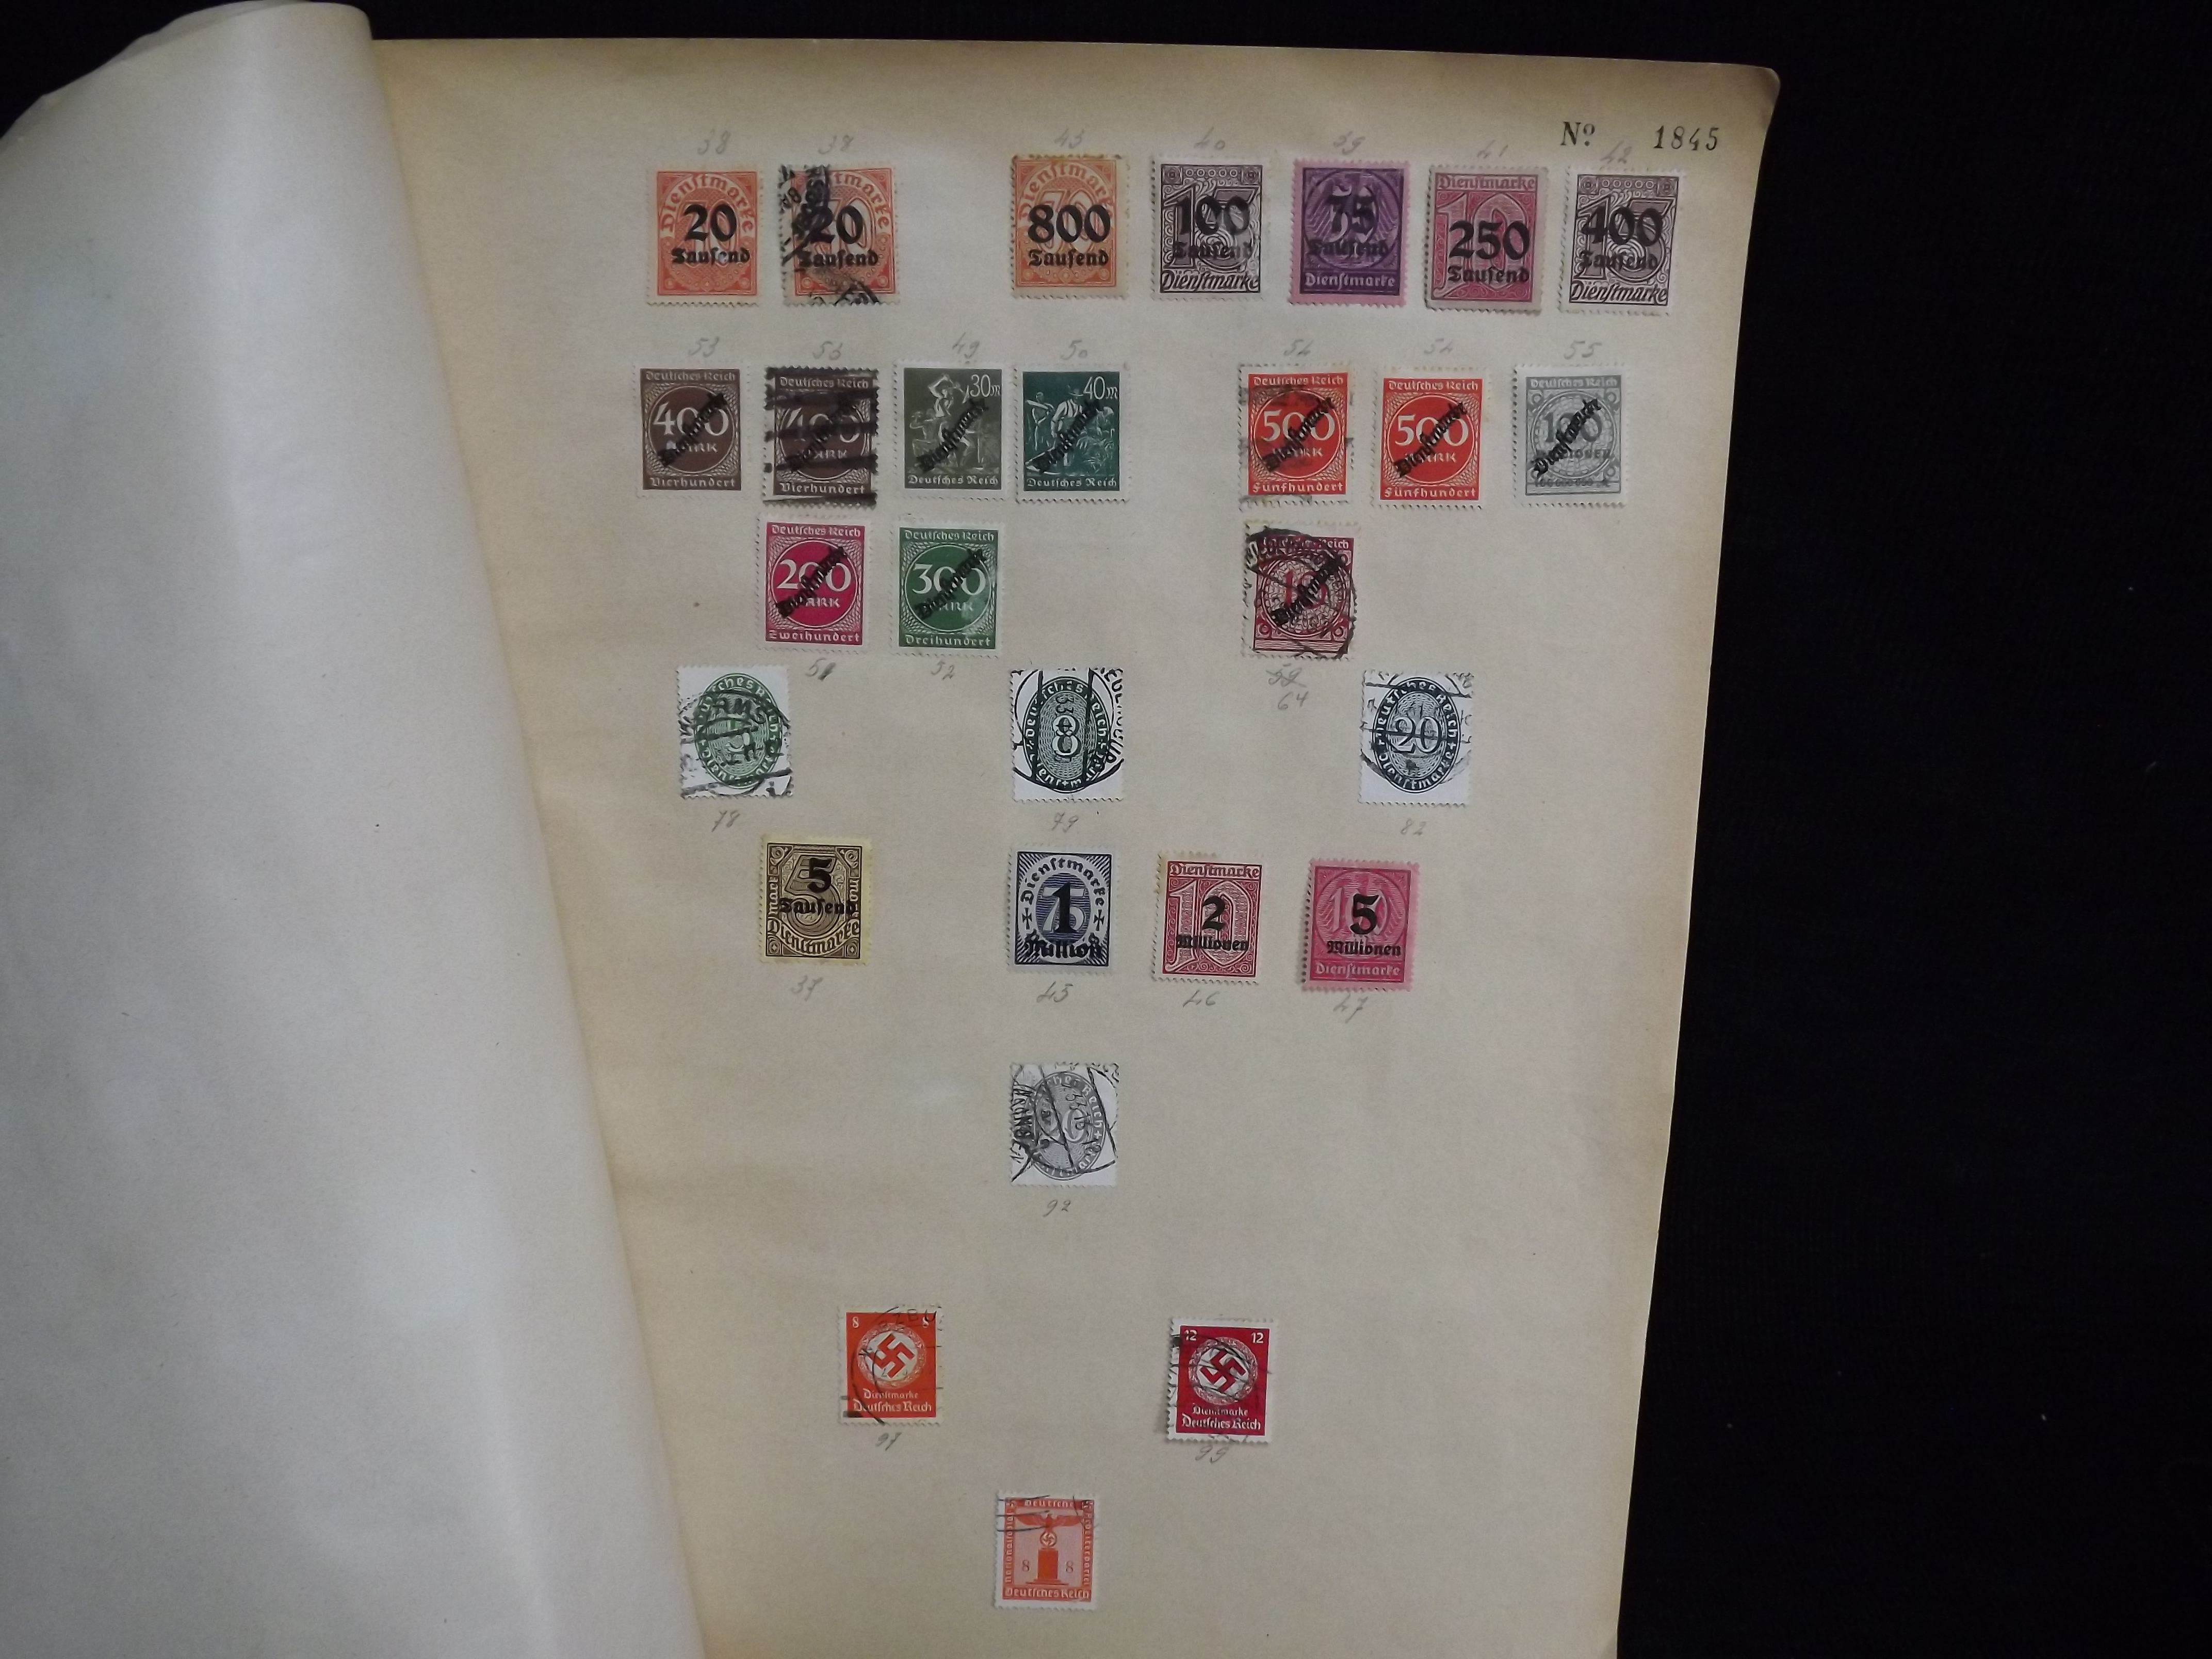 Over 500 x German Used & Mint Postage Stamps. Housed in old ledger page Album. Includes various - Image 27 of 30